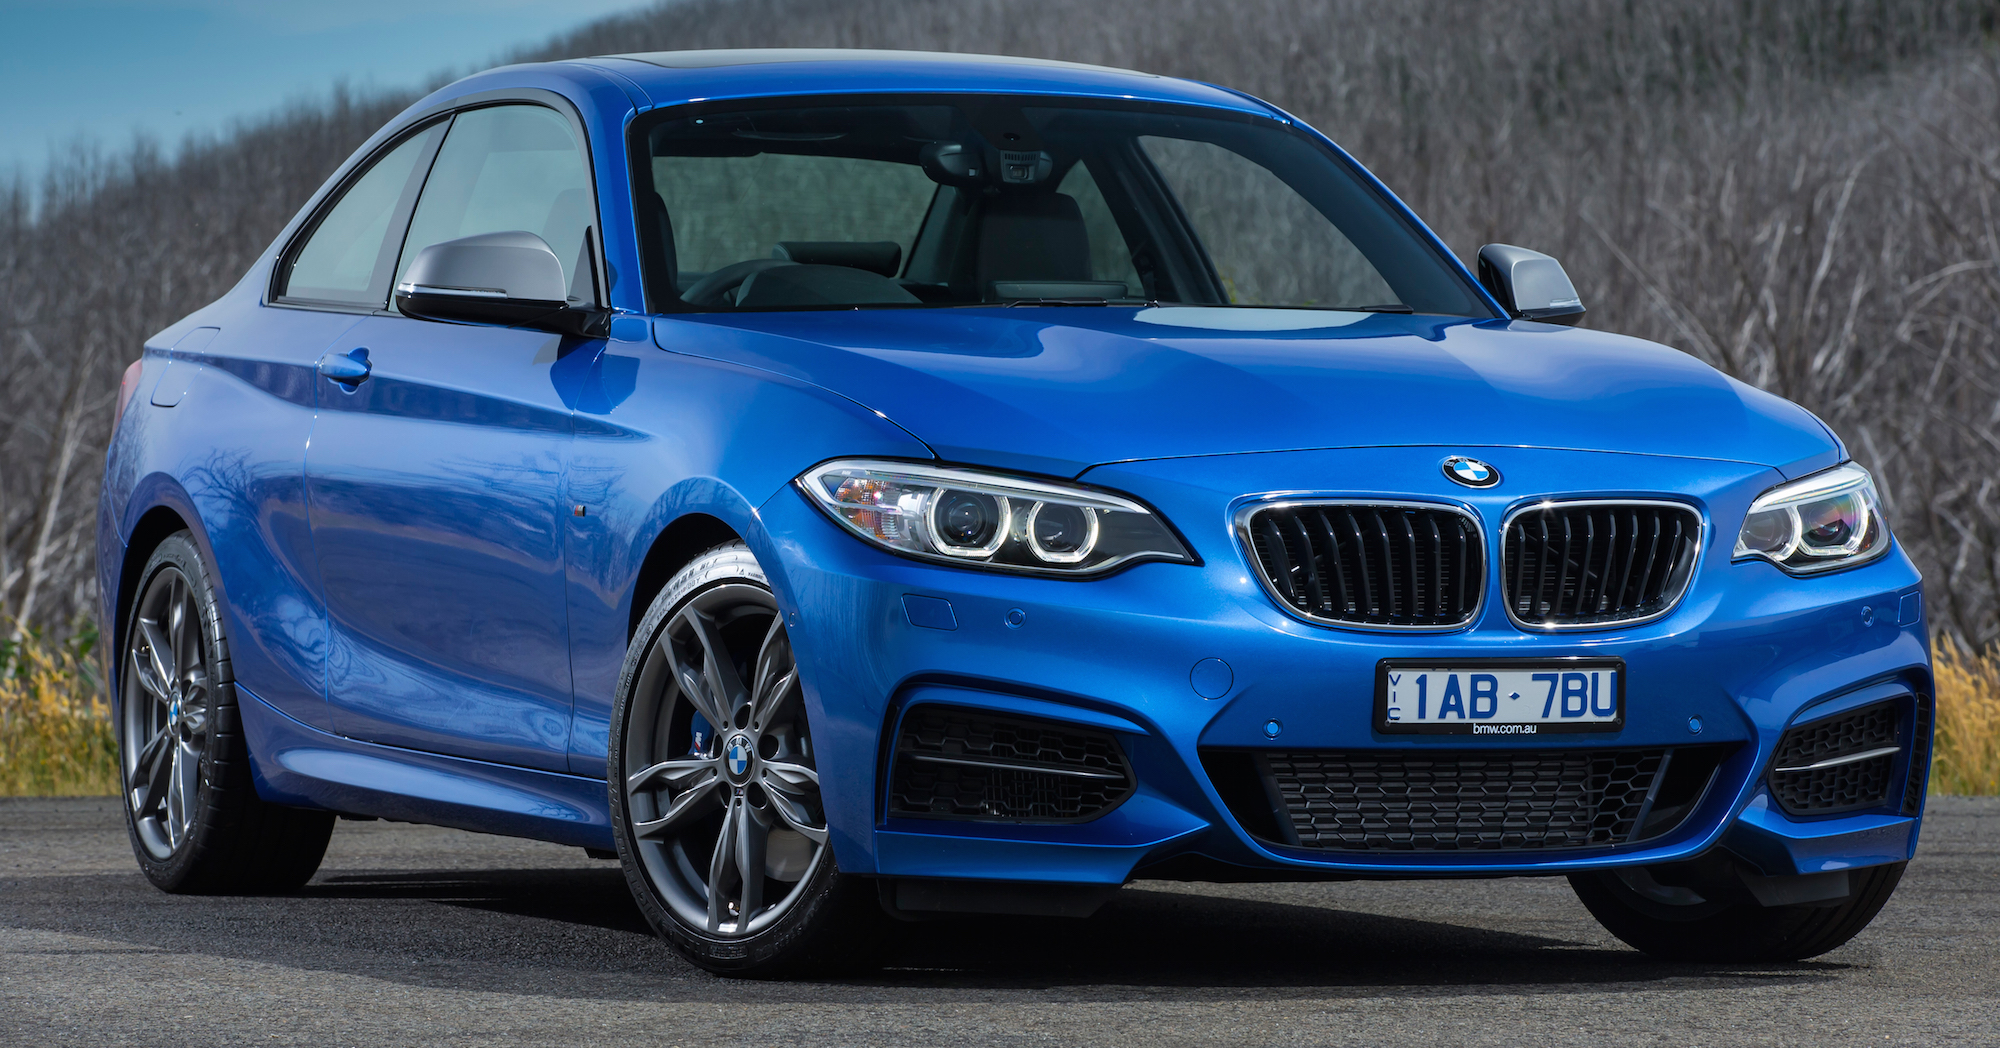 2016 BMW 2-Series Coupe and Convertible Launched in Australia